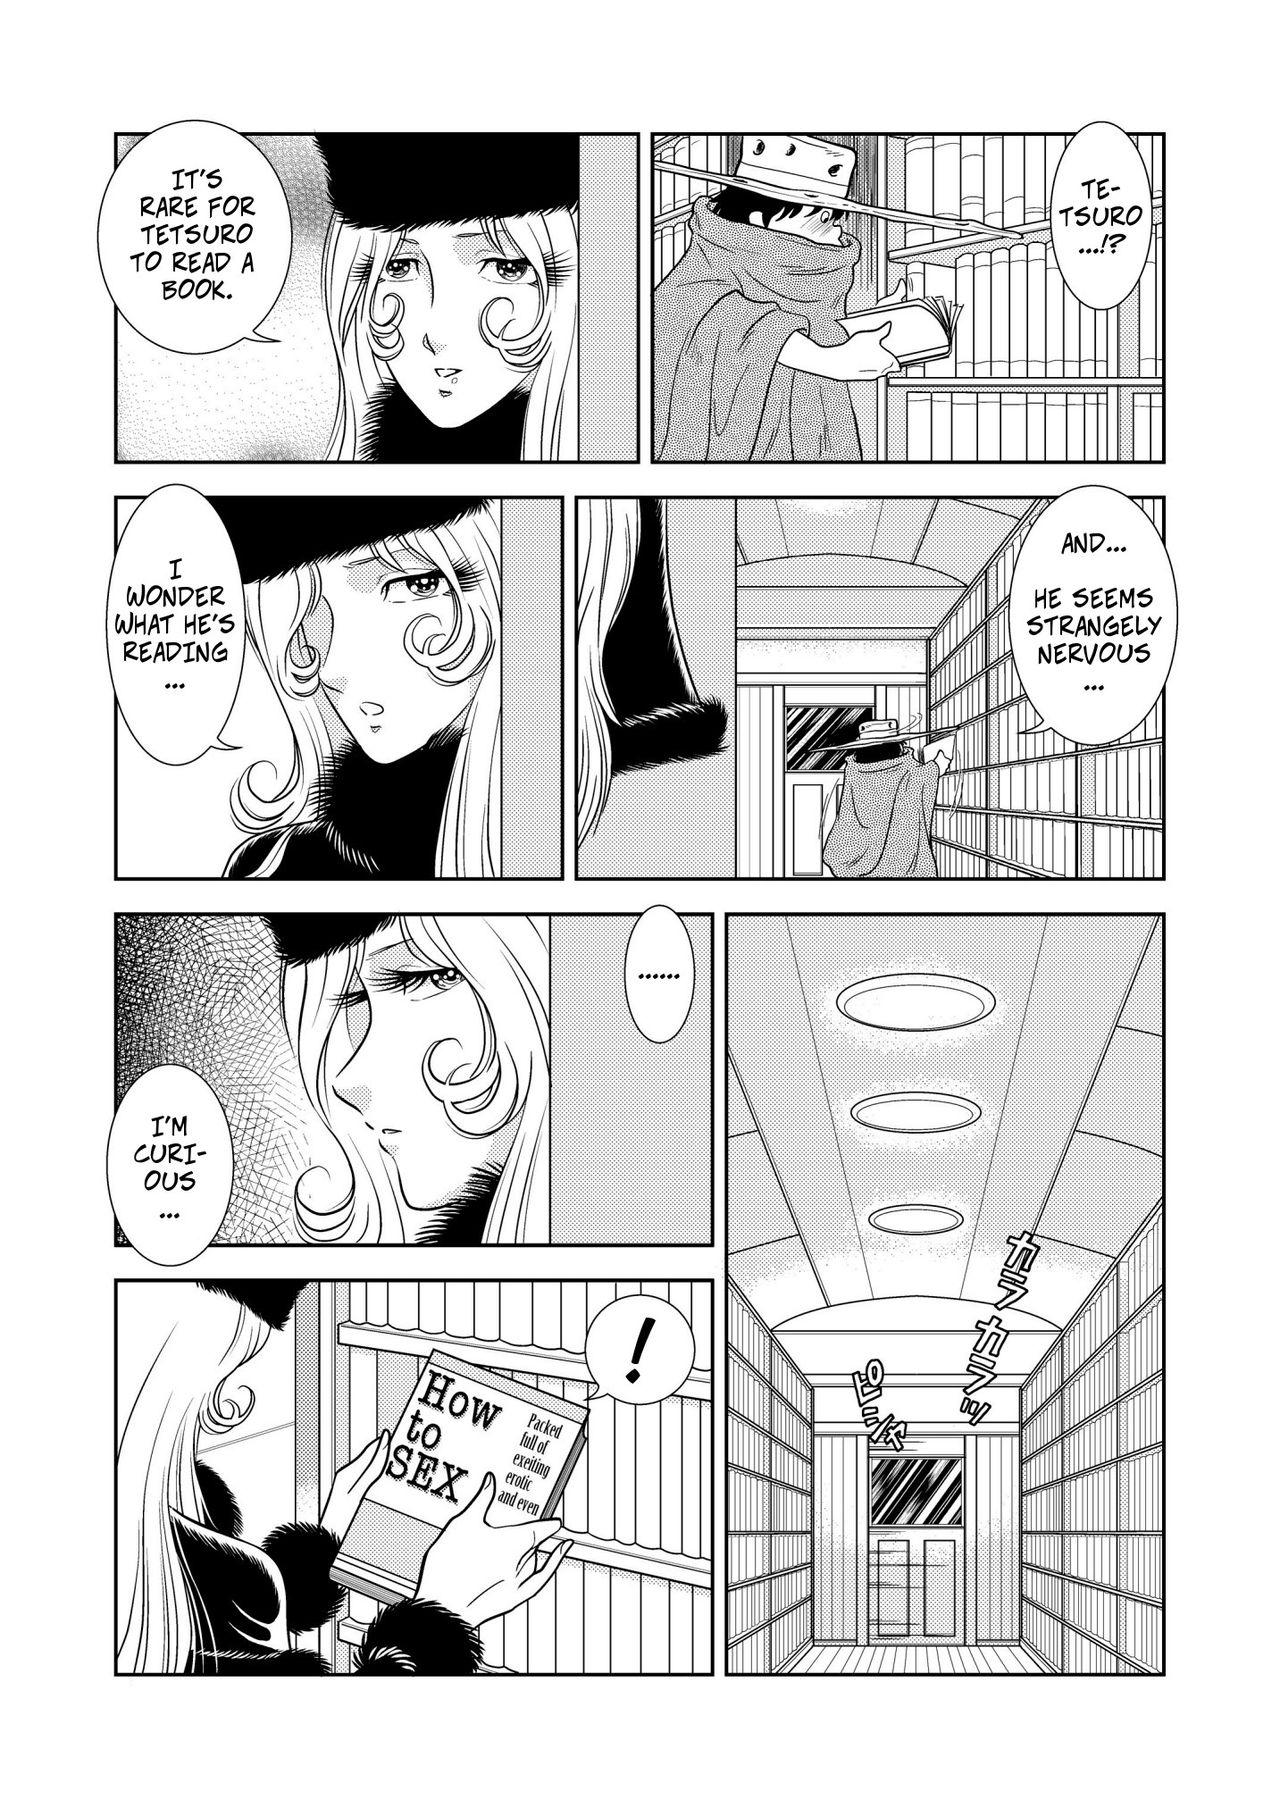 Teens Maetel Story 2 - Galaxy express 999 Shemale Porn - Page 3